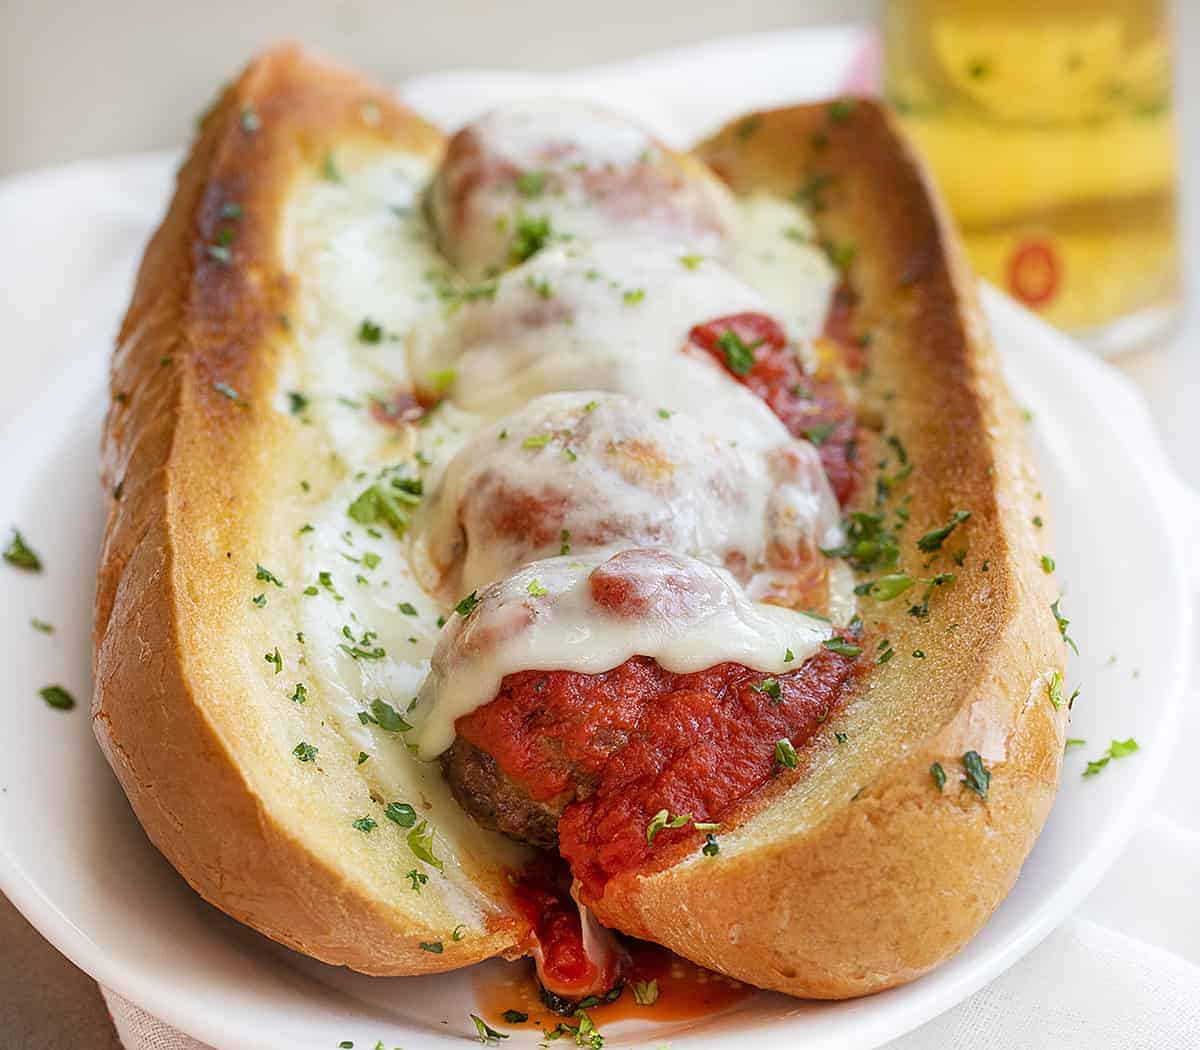 Cheese Stuffed Meatball Sub on a White Plate with Beer in Background